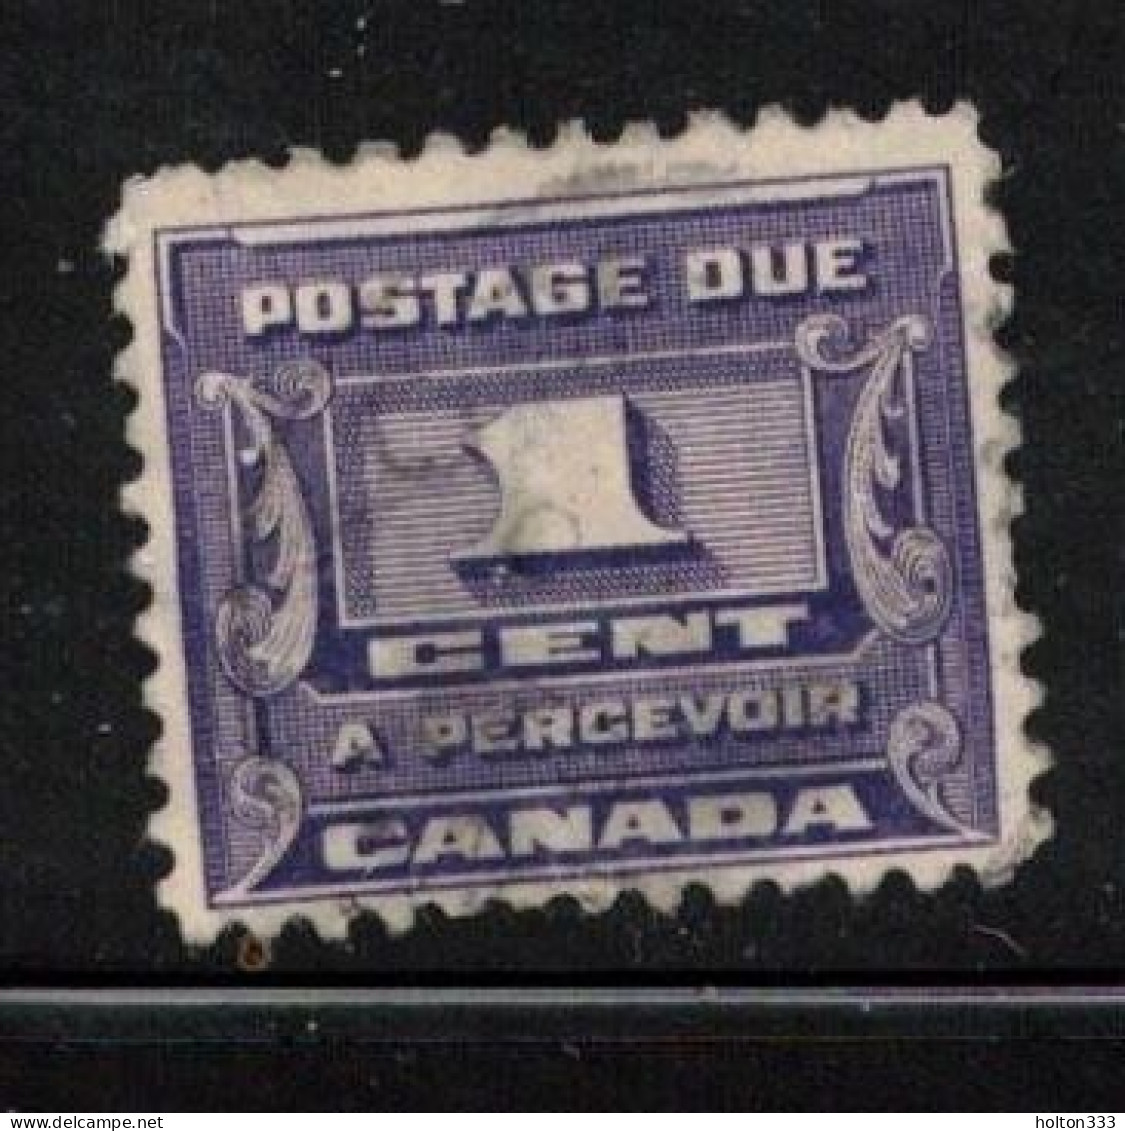 CANADA Scott # J11 Used - Postage Due - Fiscale Zegels